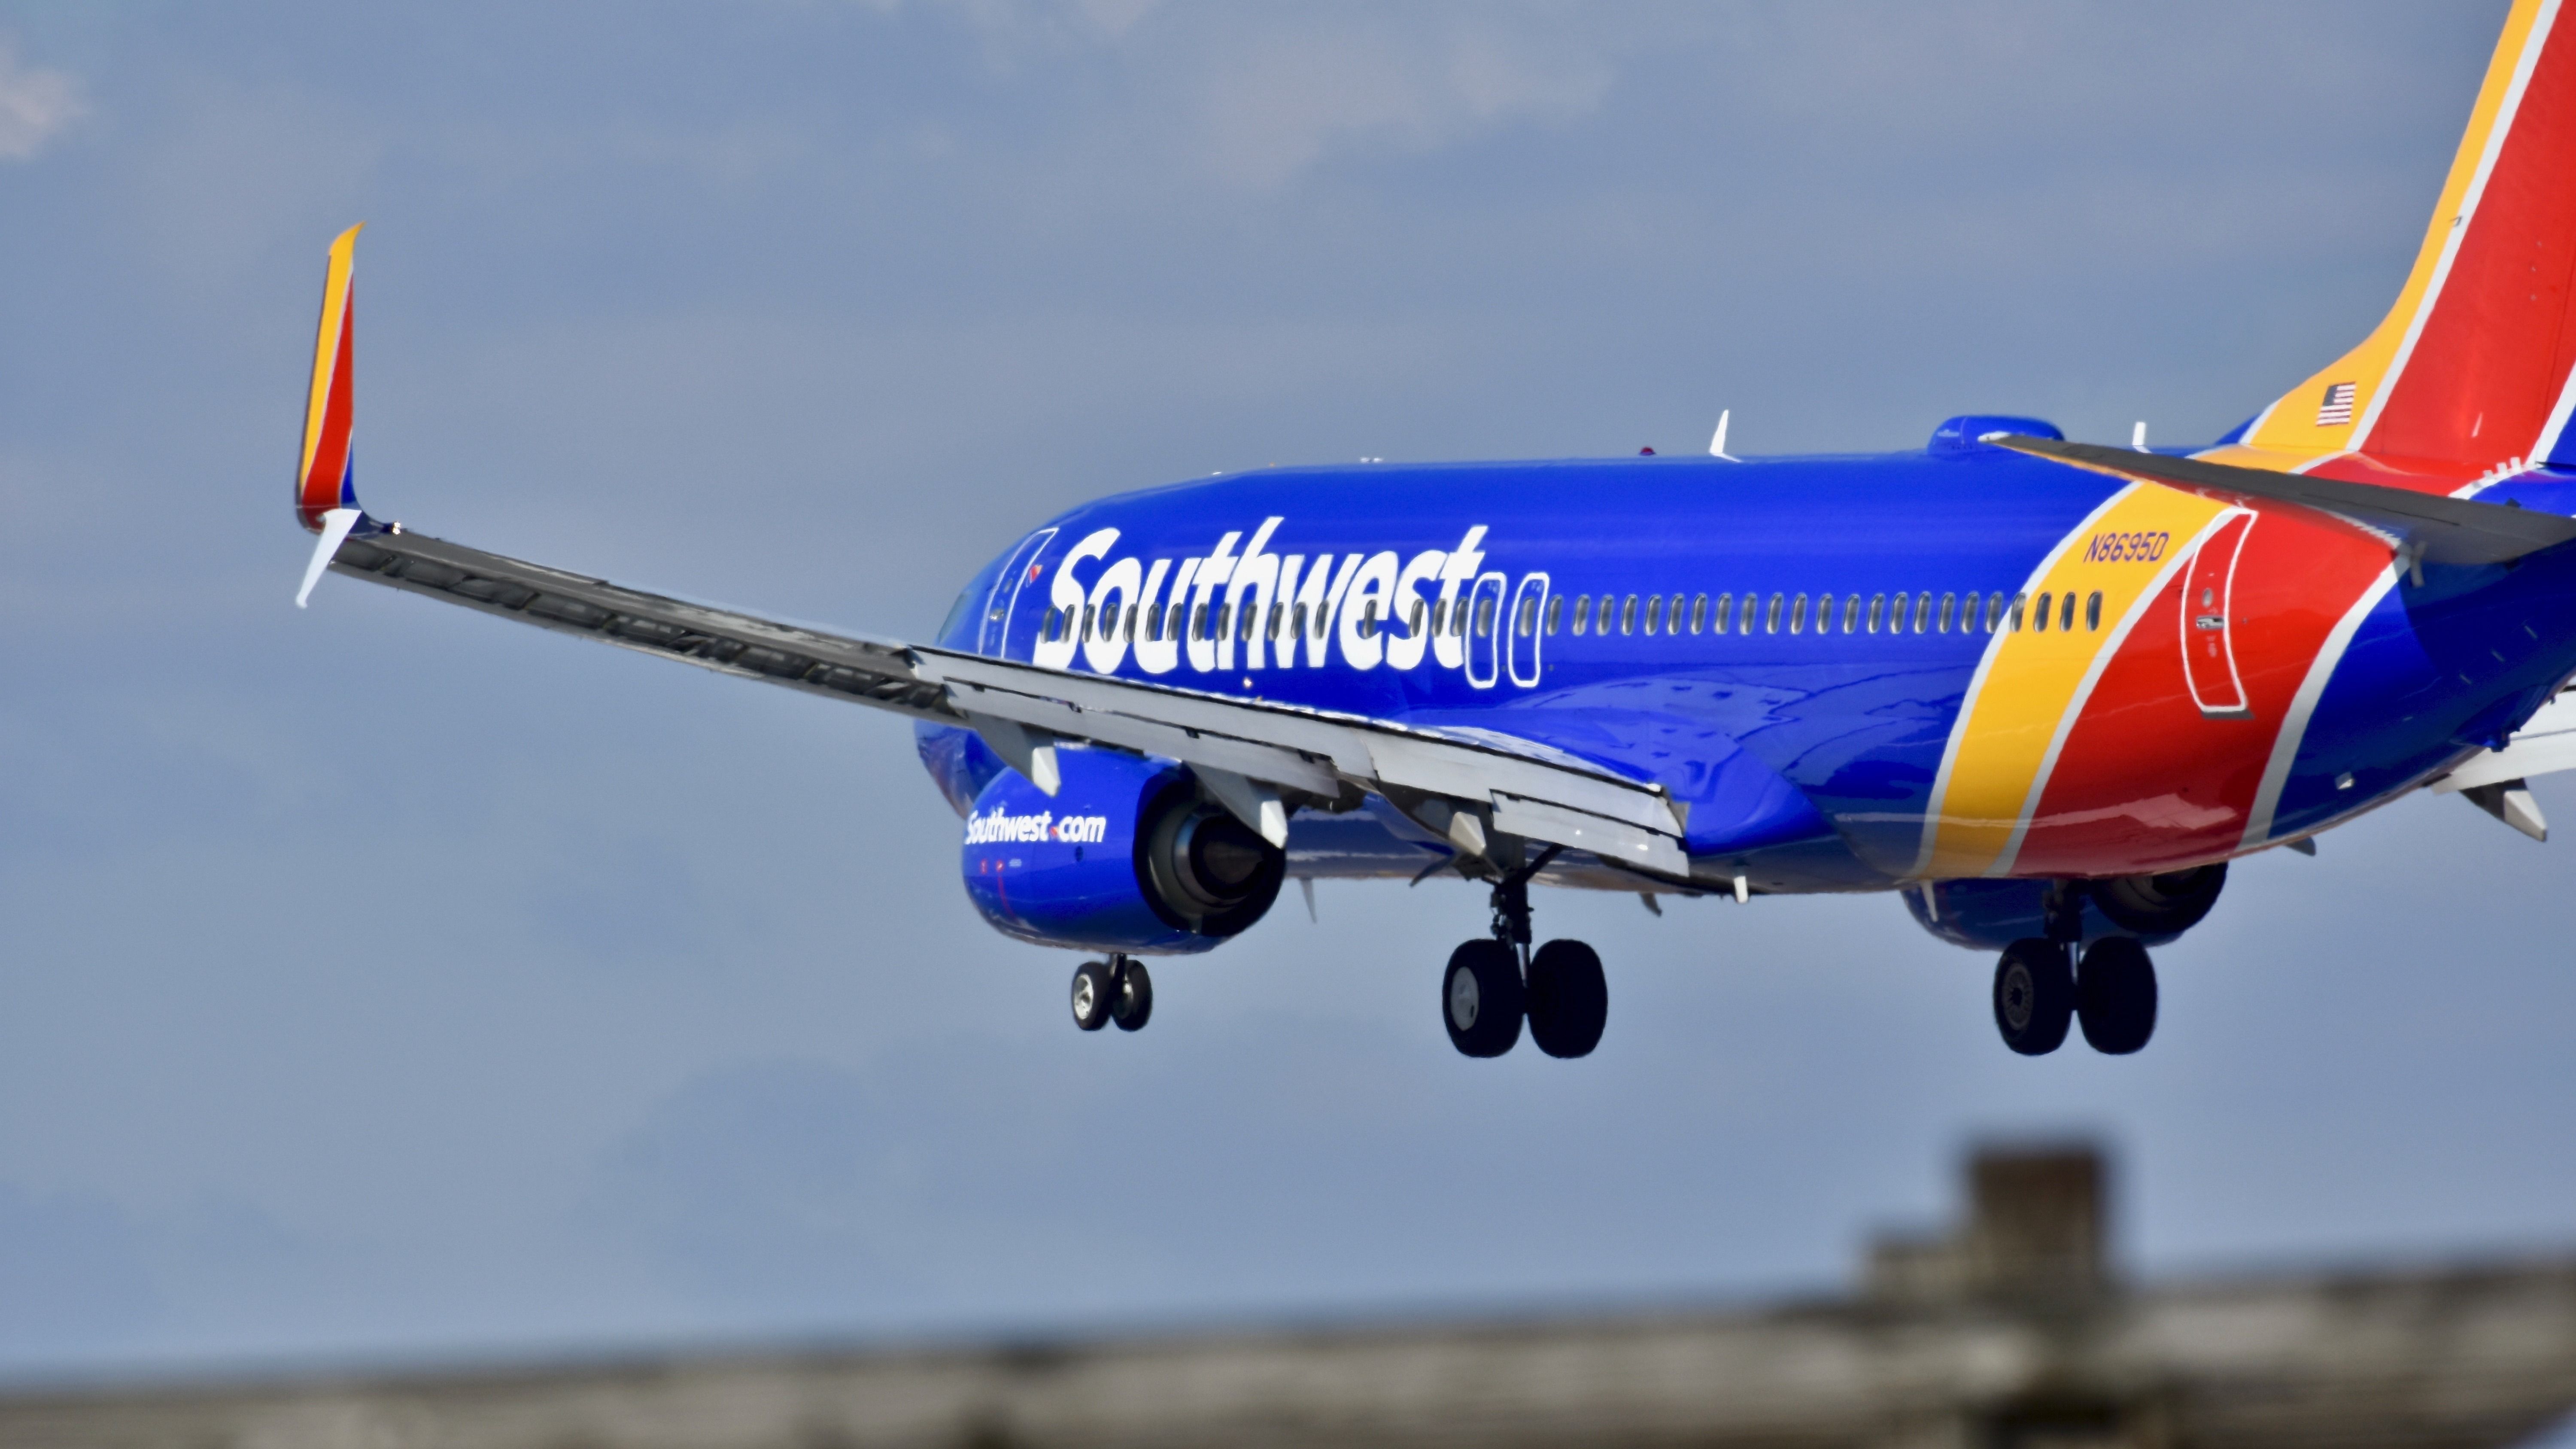 A Southwest Airlines Boeing 737 flying low to the ground.